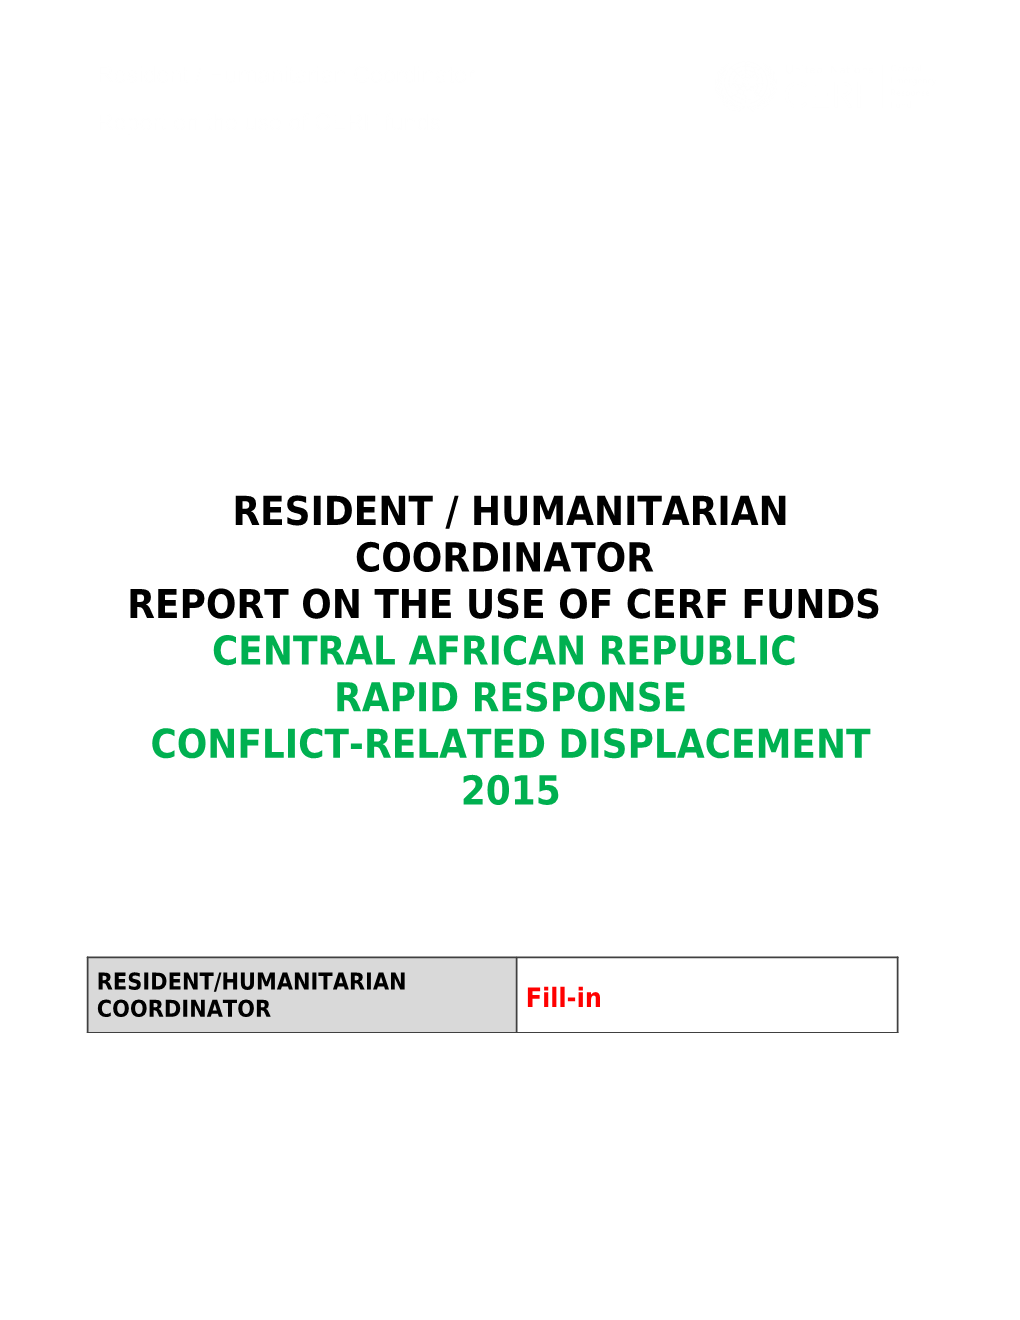 Clean RCHC Report 2012 Template ENGLISH